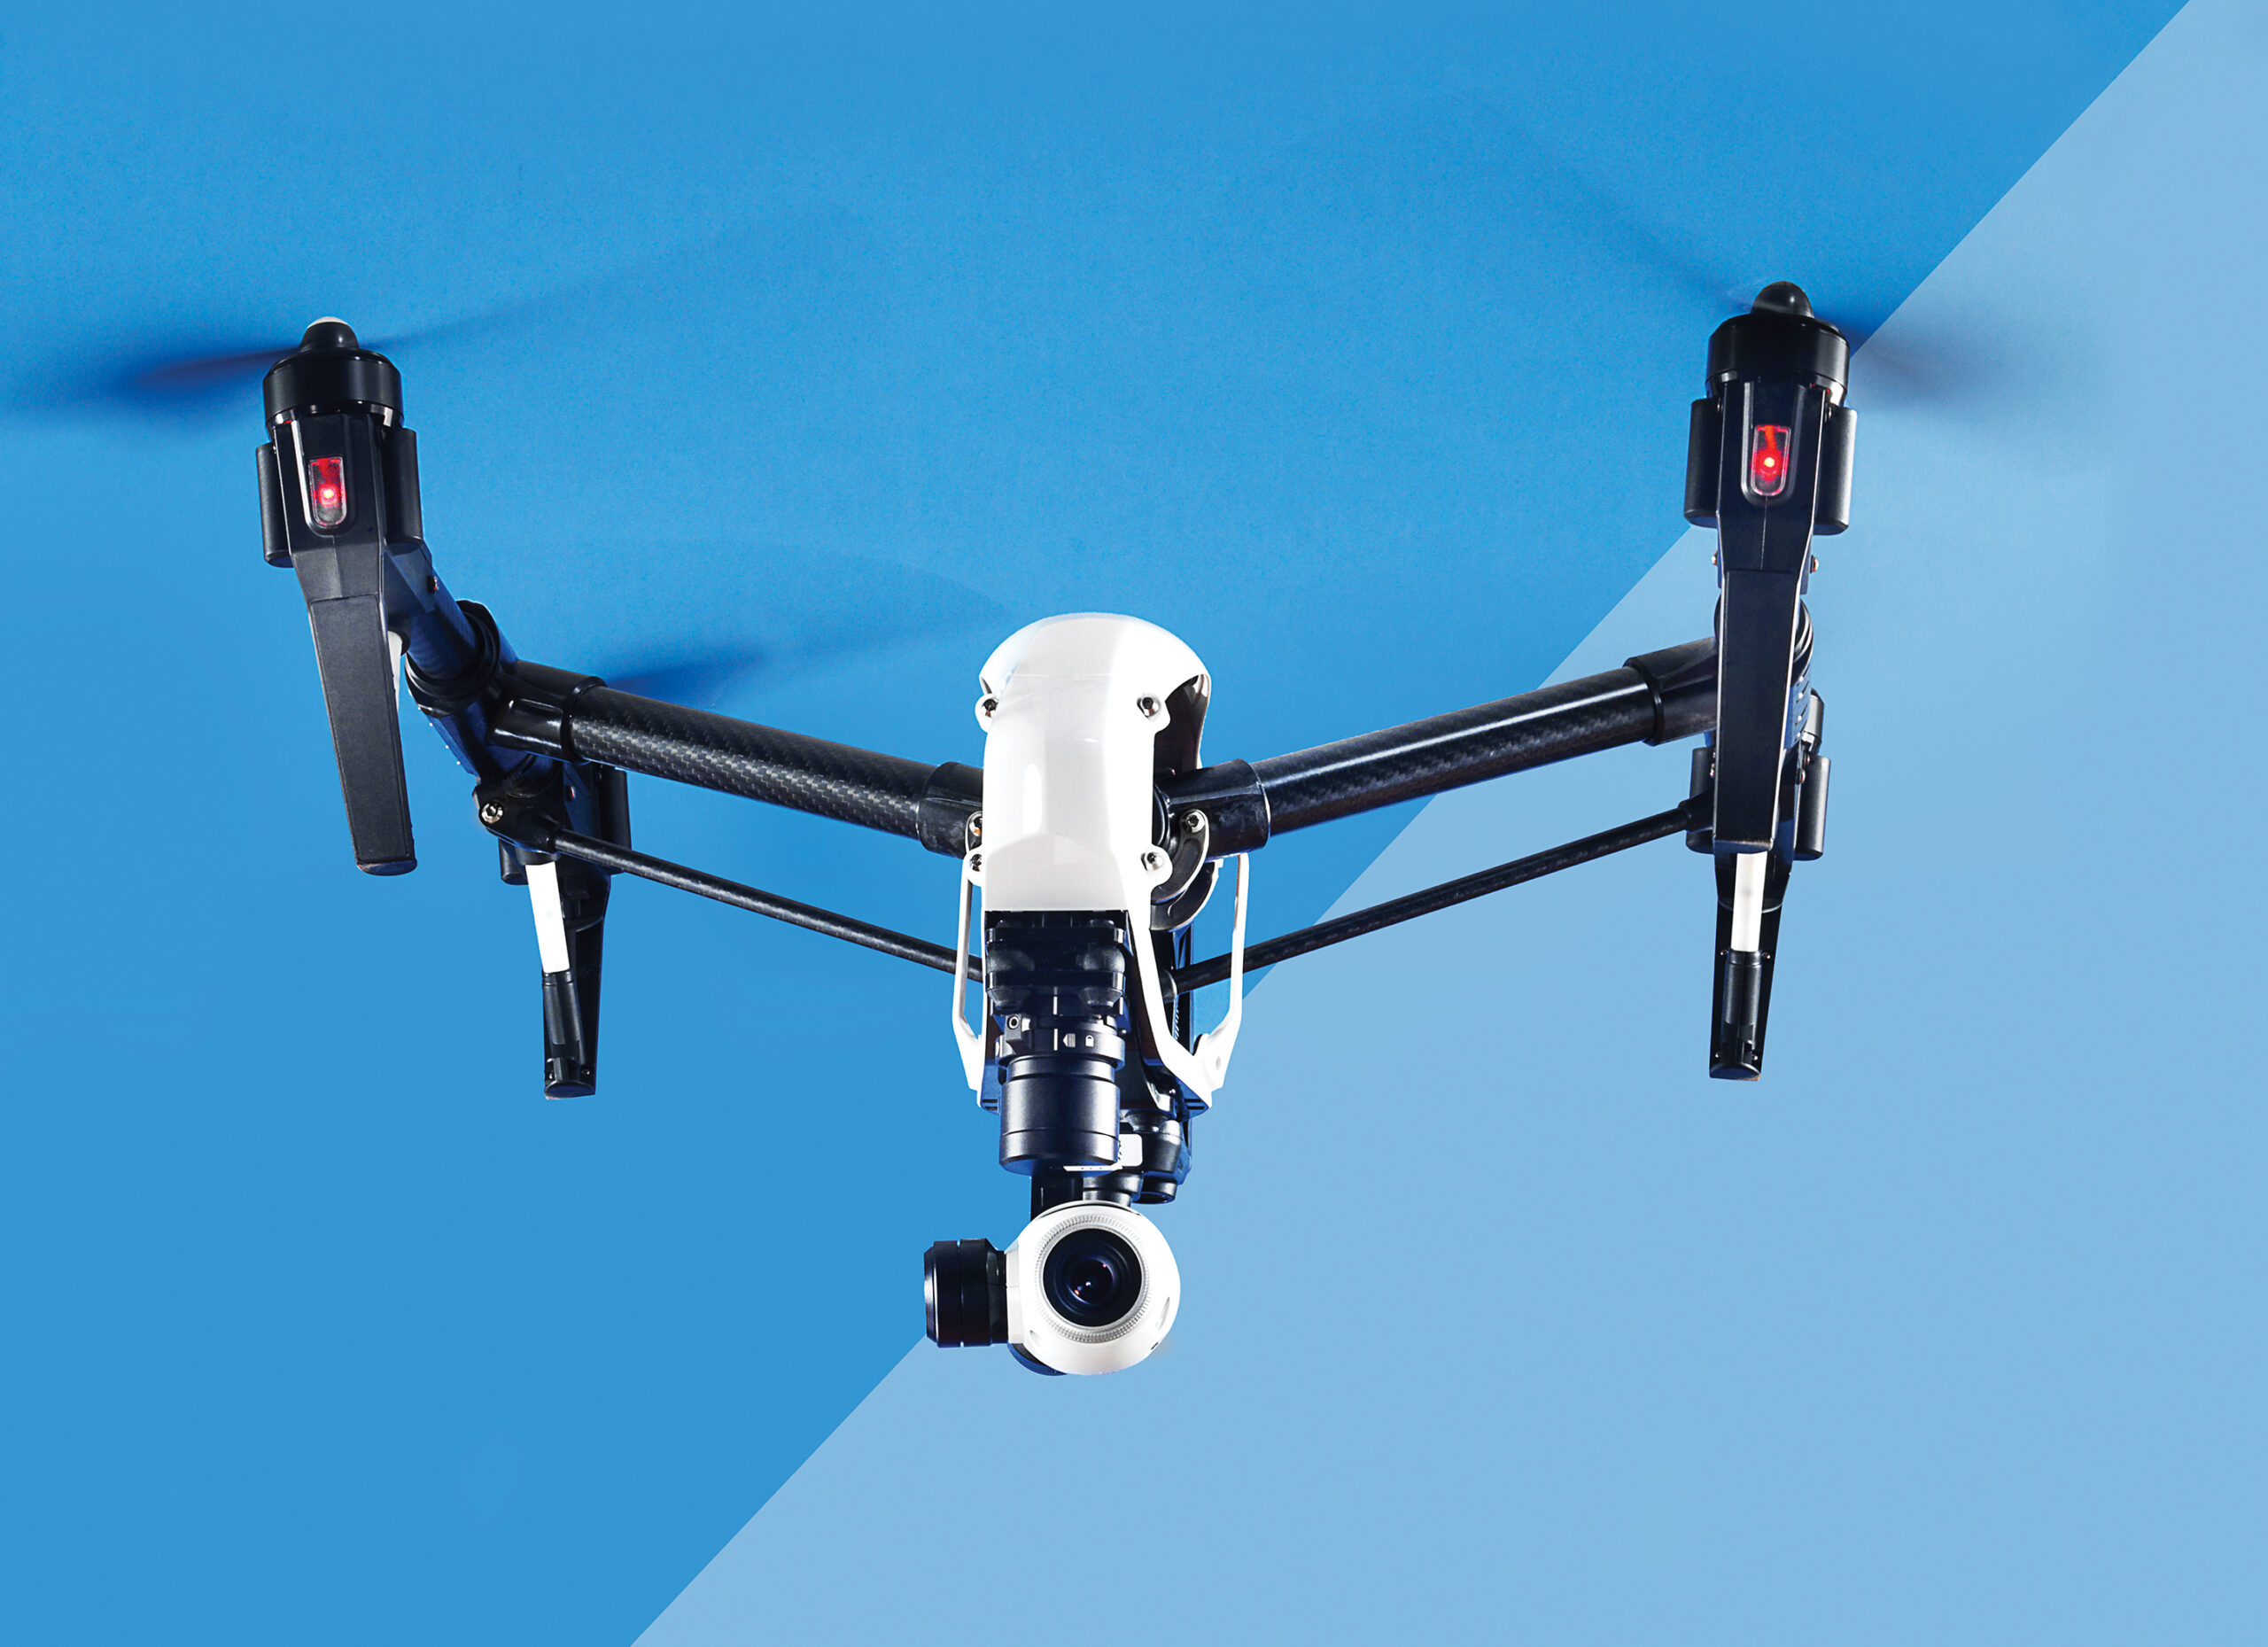 The Best Drone For Aspiring Filmmakers